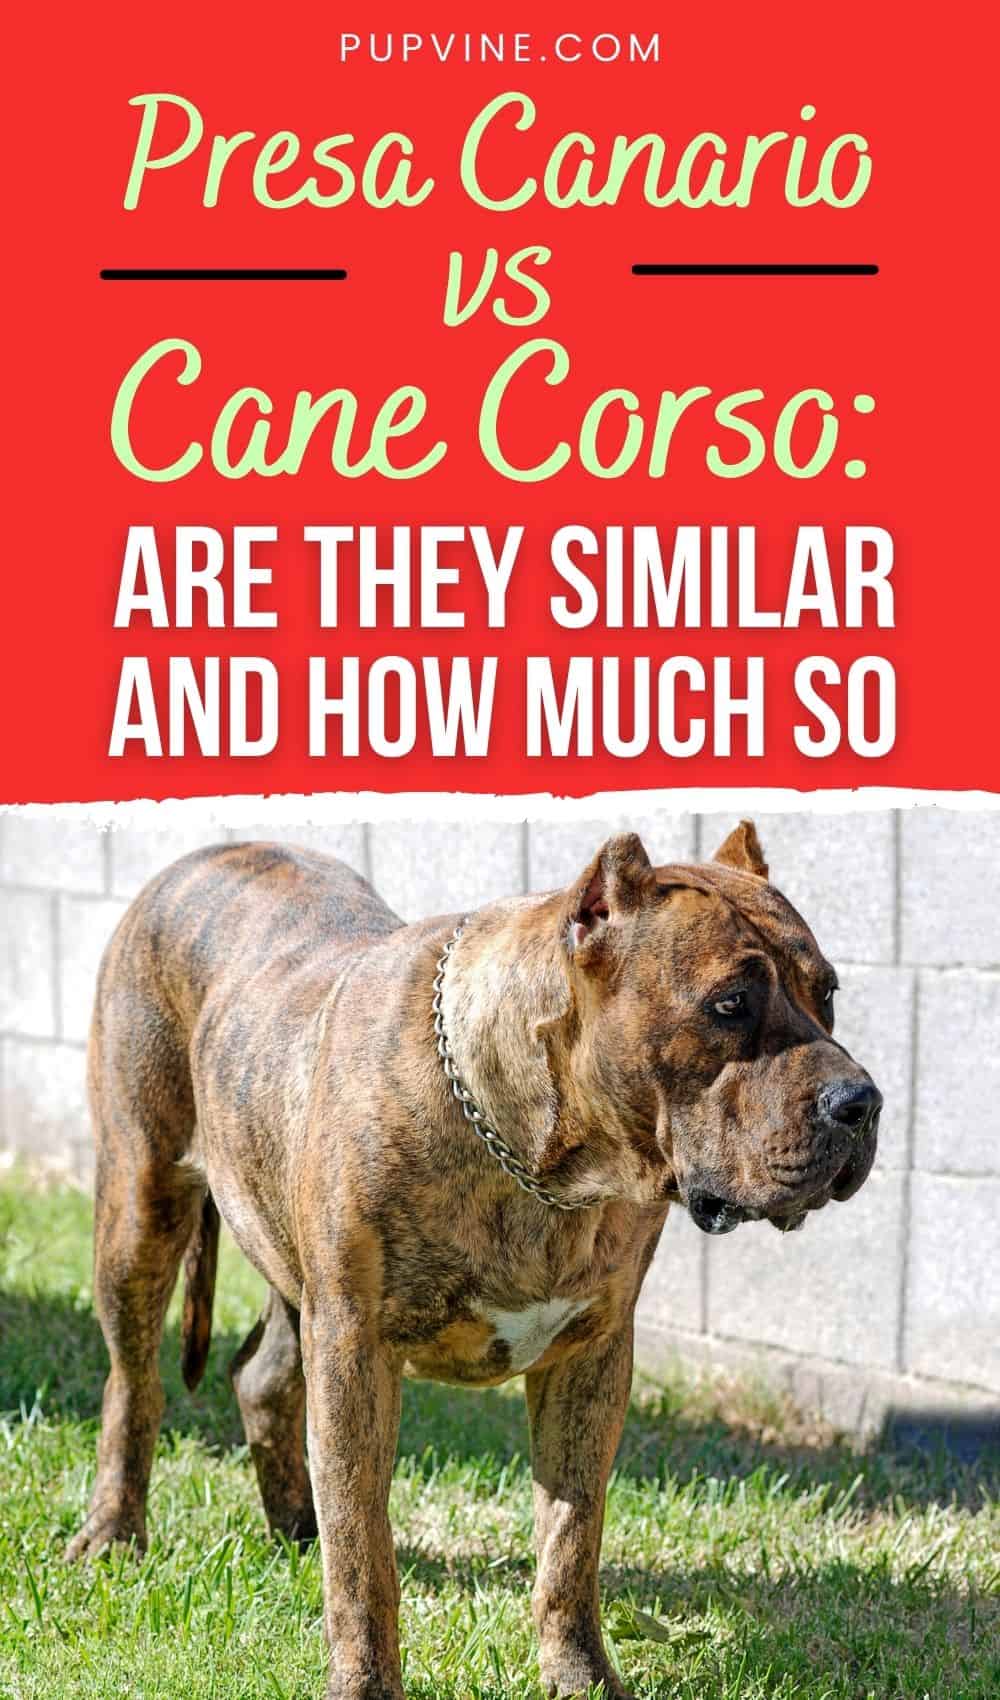 Presa Canario vs Cane Corso Are They Similar and How Much So